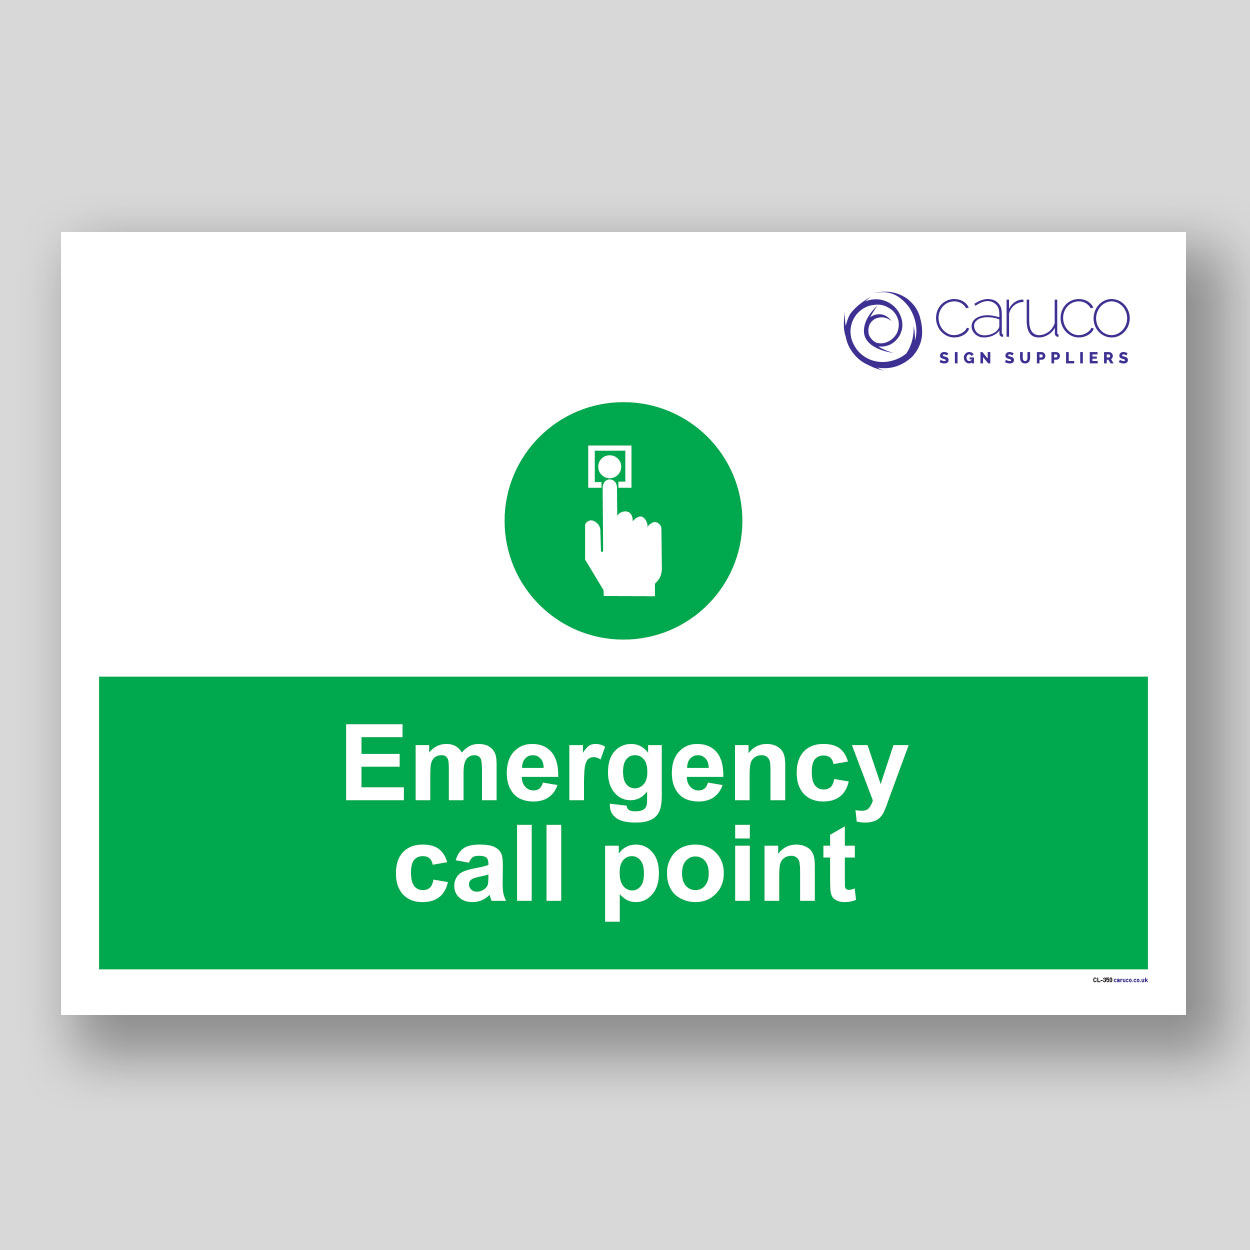 CL-350 Emergency call point